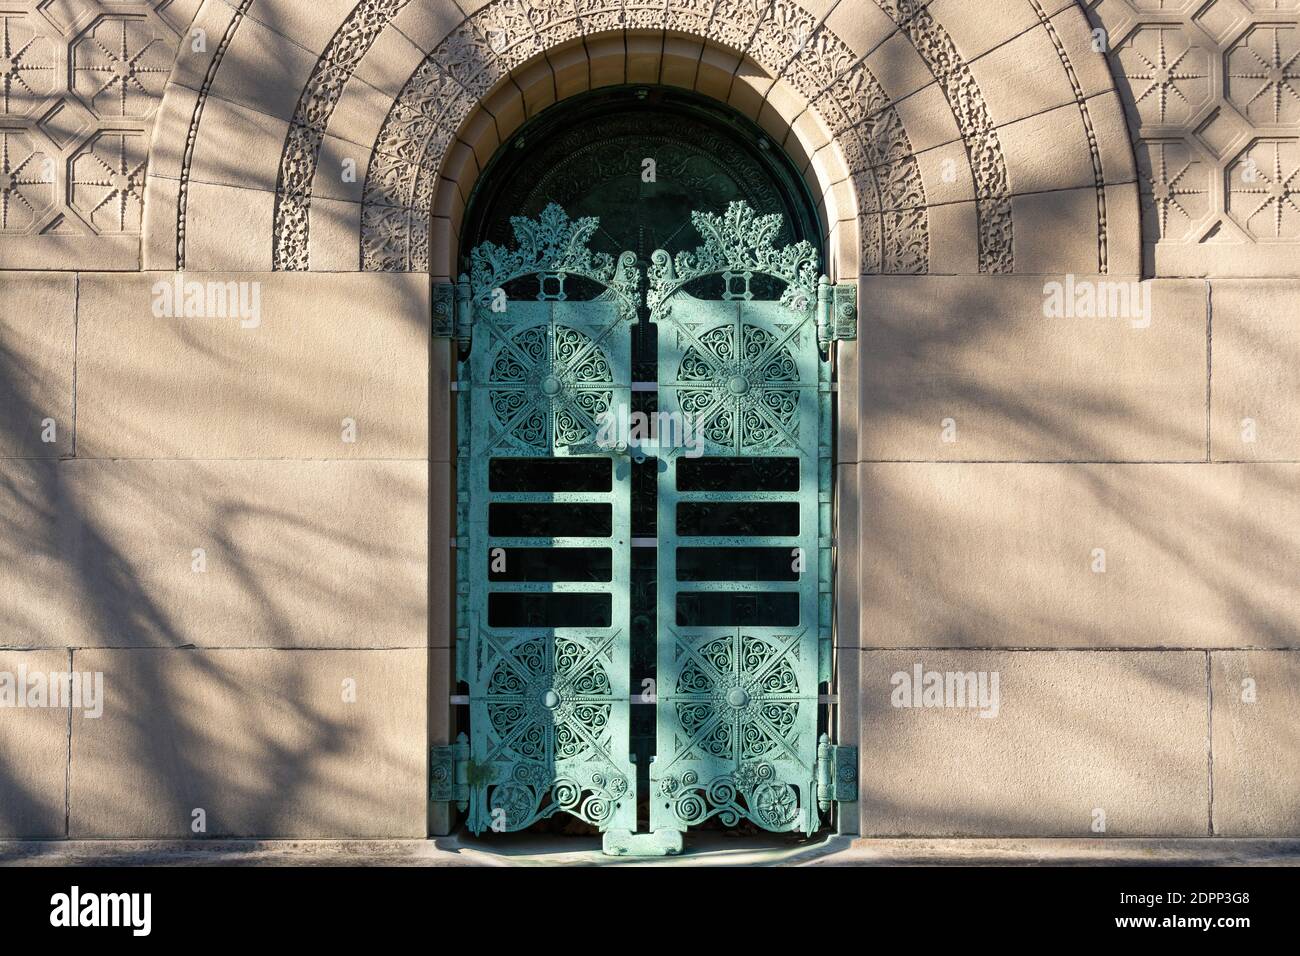 Chicago, Illinois / United States - December 9th, 2020: The Carrie Eliza Getty Tomb by architect Louis Sullivan in Graceland Cemetery. Stock Photo